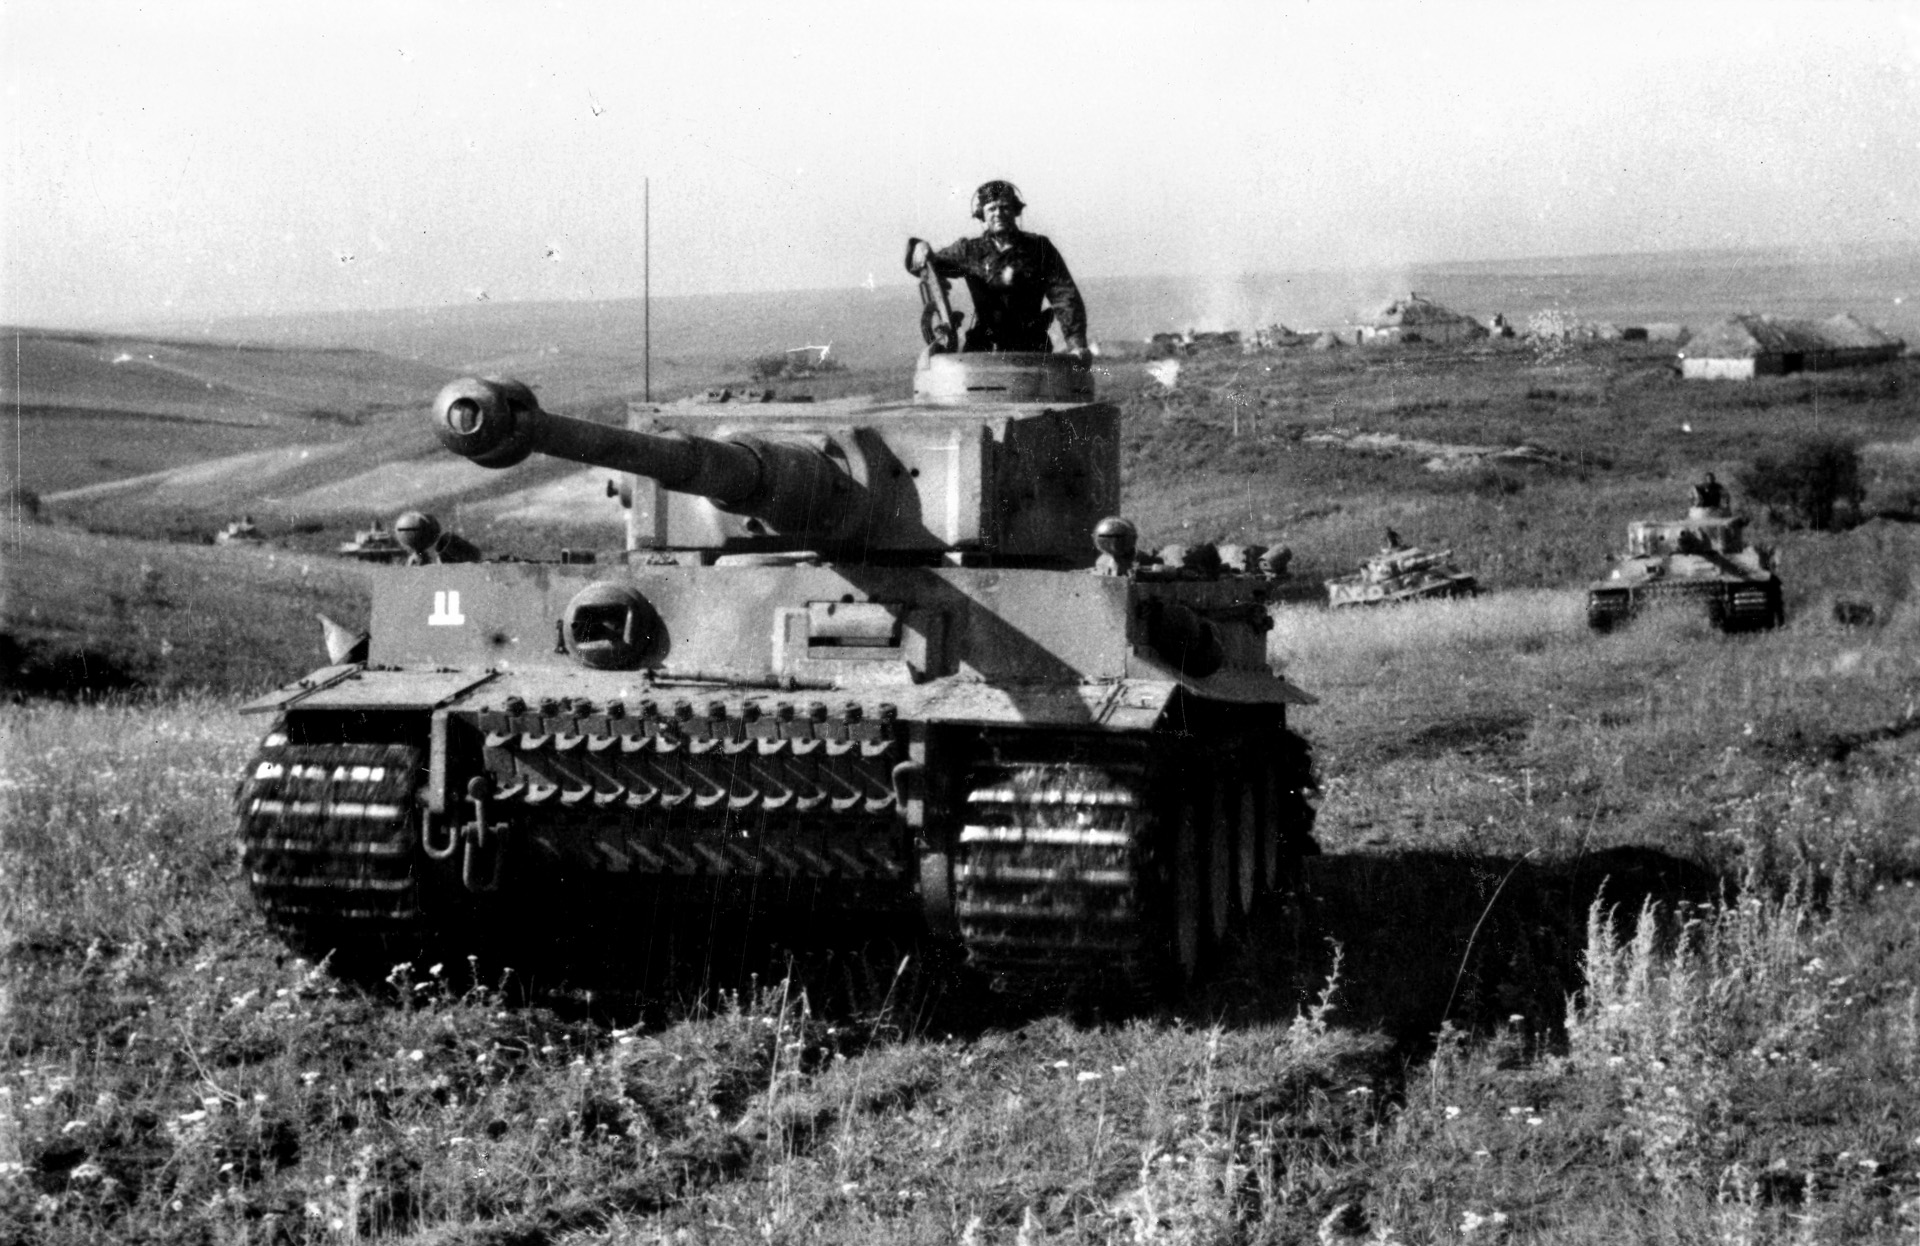 A Tiger tank of Waffen SS division Das Reich goes into action against Soviet forces in the southern part of the Kursk salient. Its 88mm gun could penetrate the armor of a Soviet T-34 at 1,800 yards.